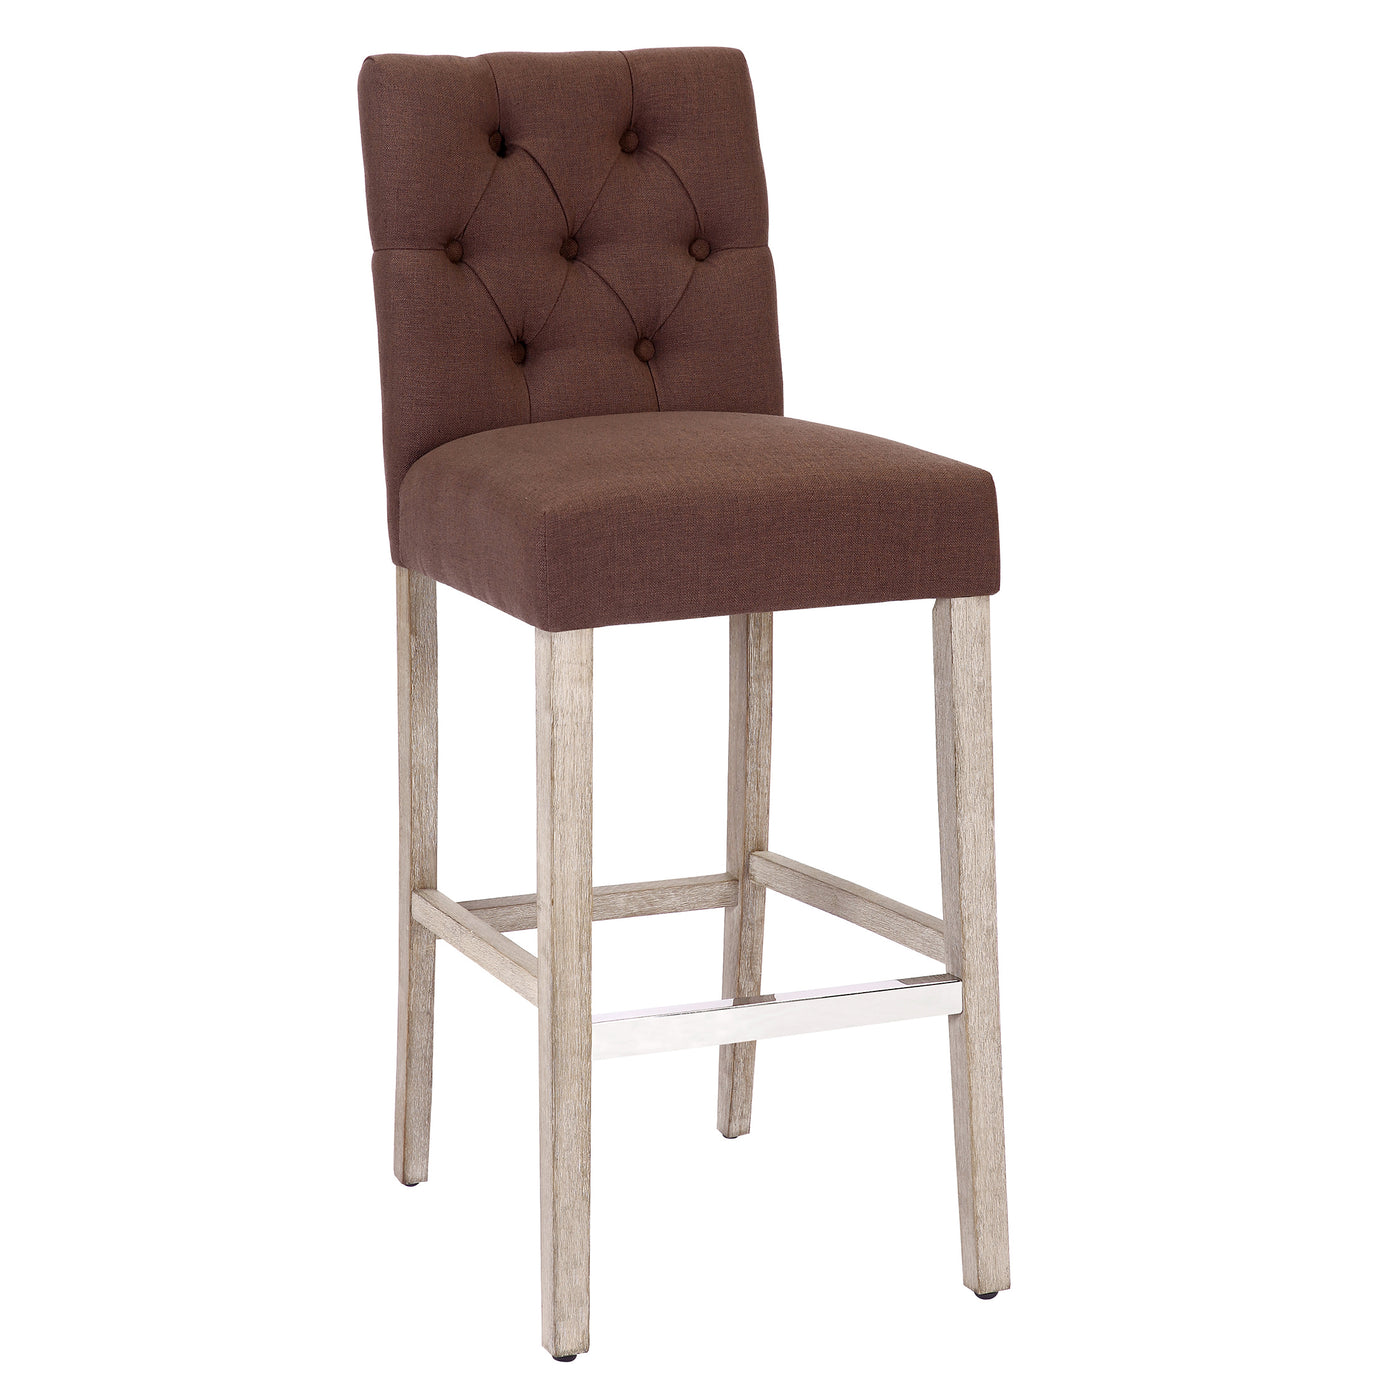 Hayes 29" Linen Fabric Tufted Bar Stool, Antique Gray